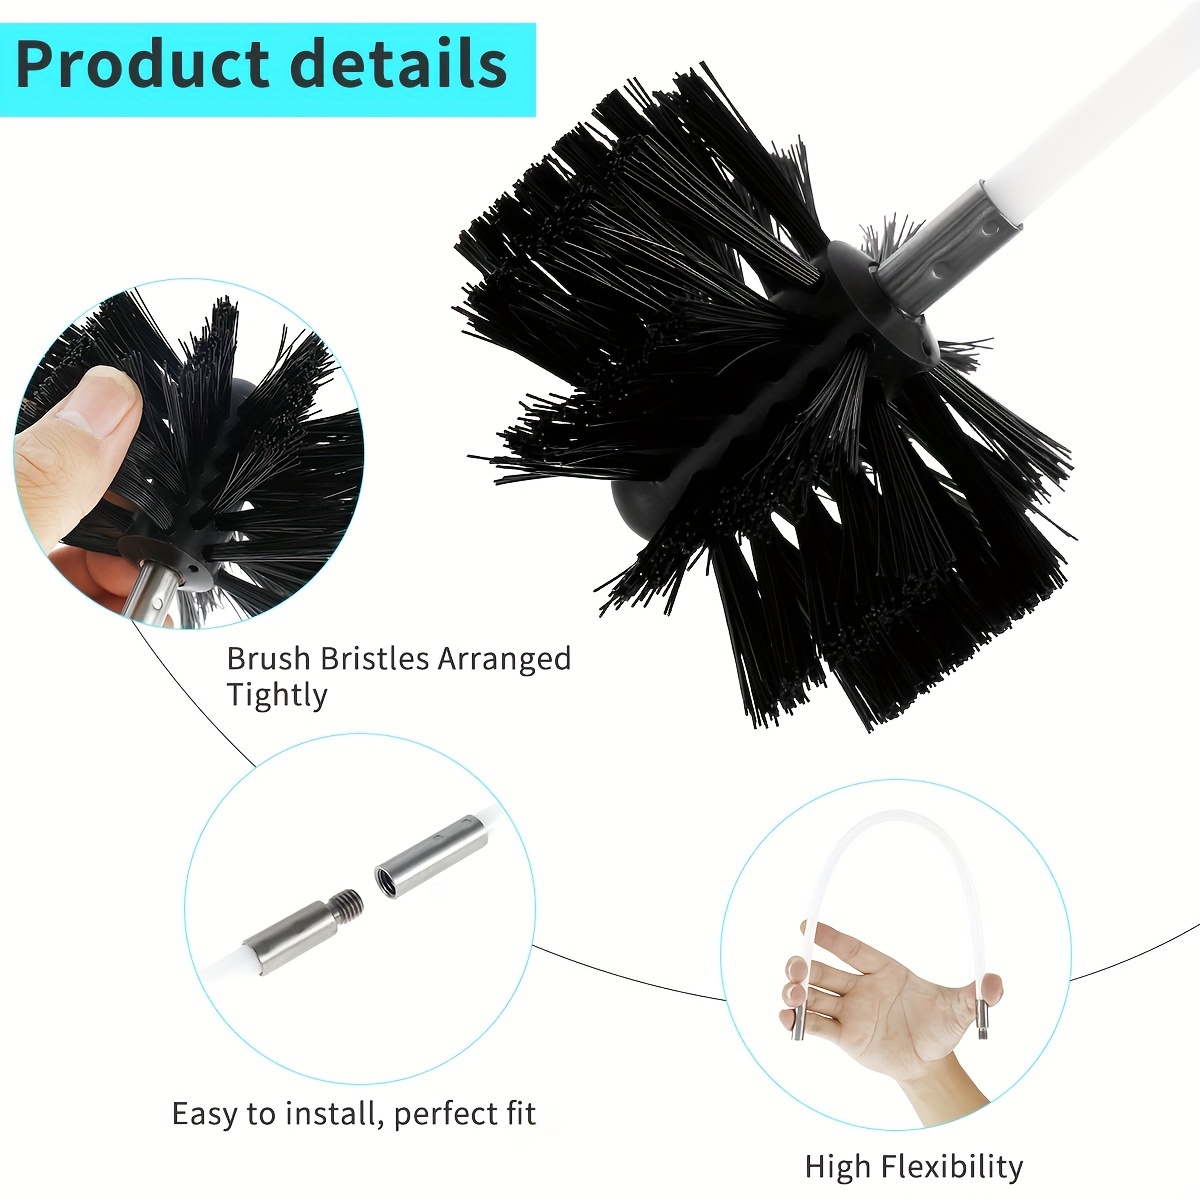 Cleaning Brush Flexible Long Multipurpose Duster Washing Machine Dryer With  Wood Handle Cleaning Brushes Radiator Tools